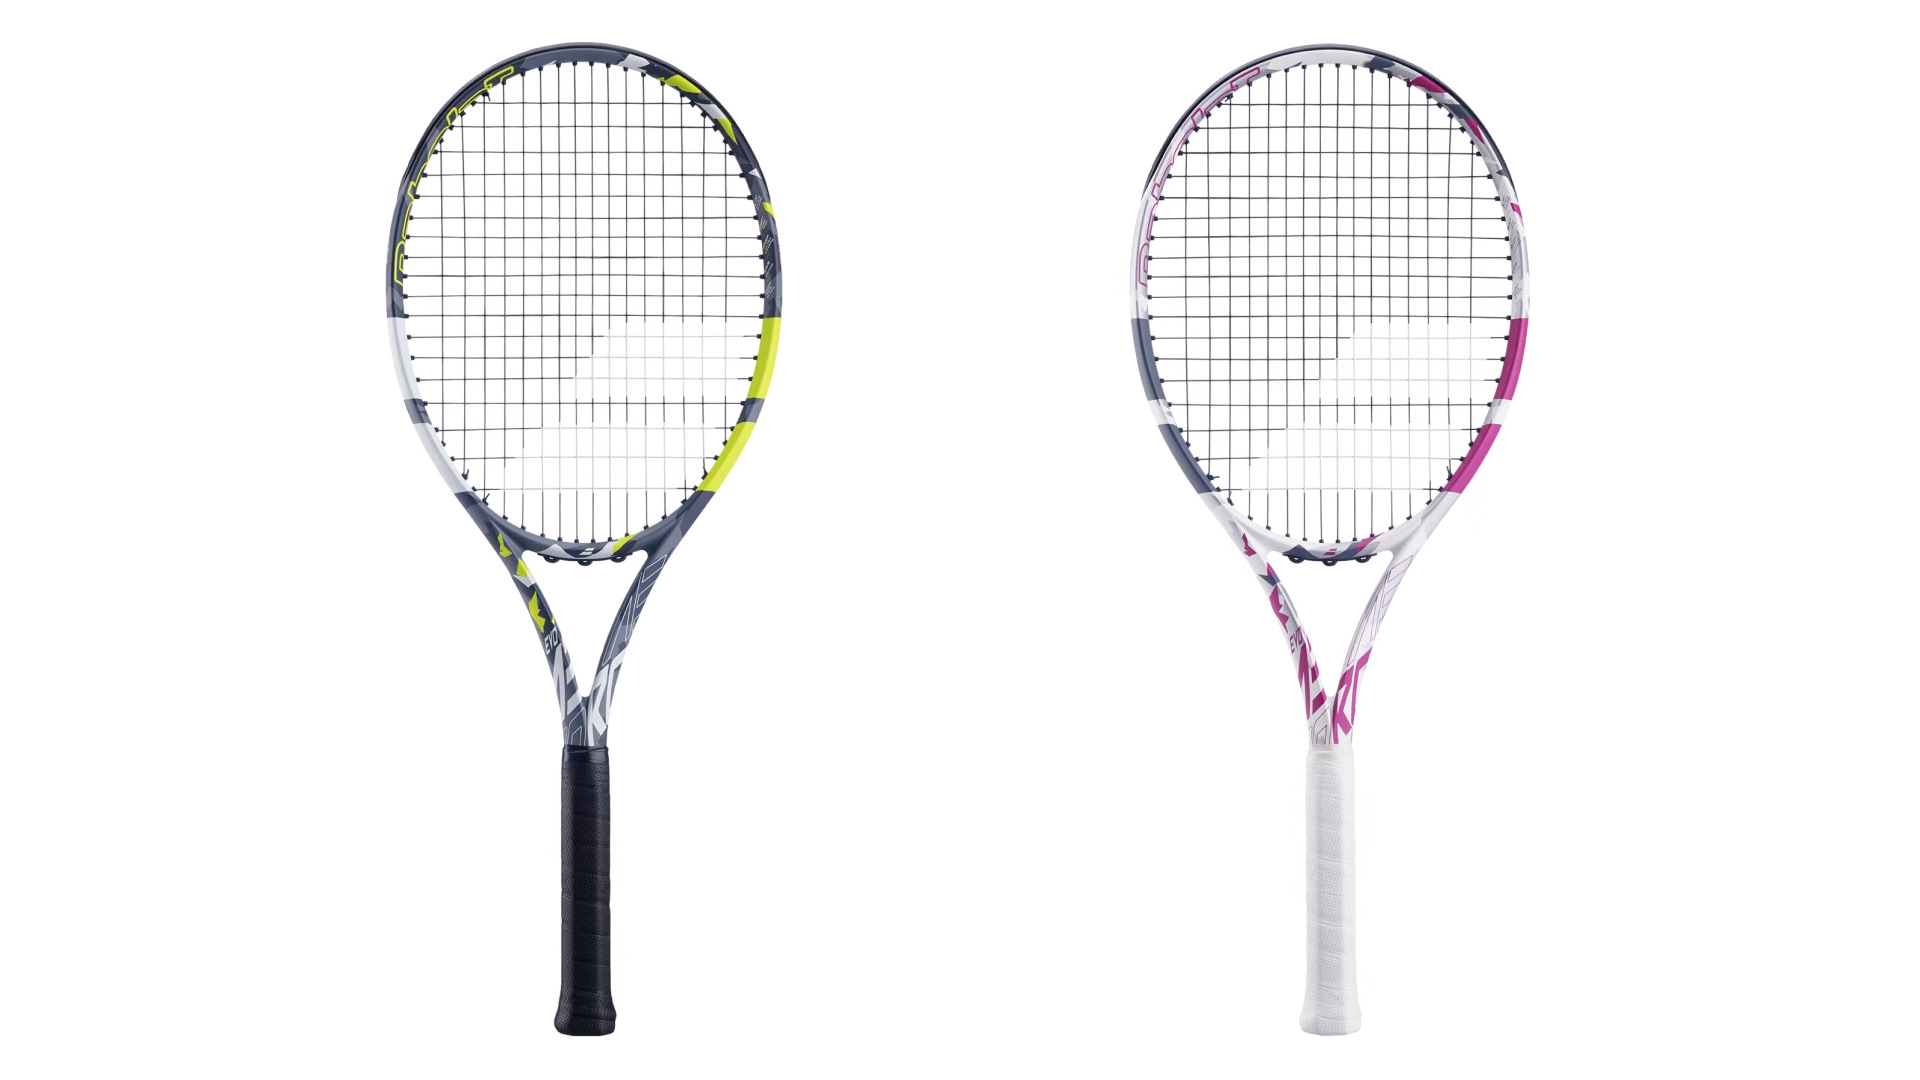 Babolat expands popular Evo line with two new racquet models